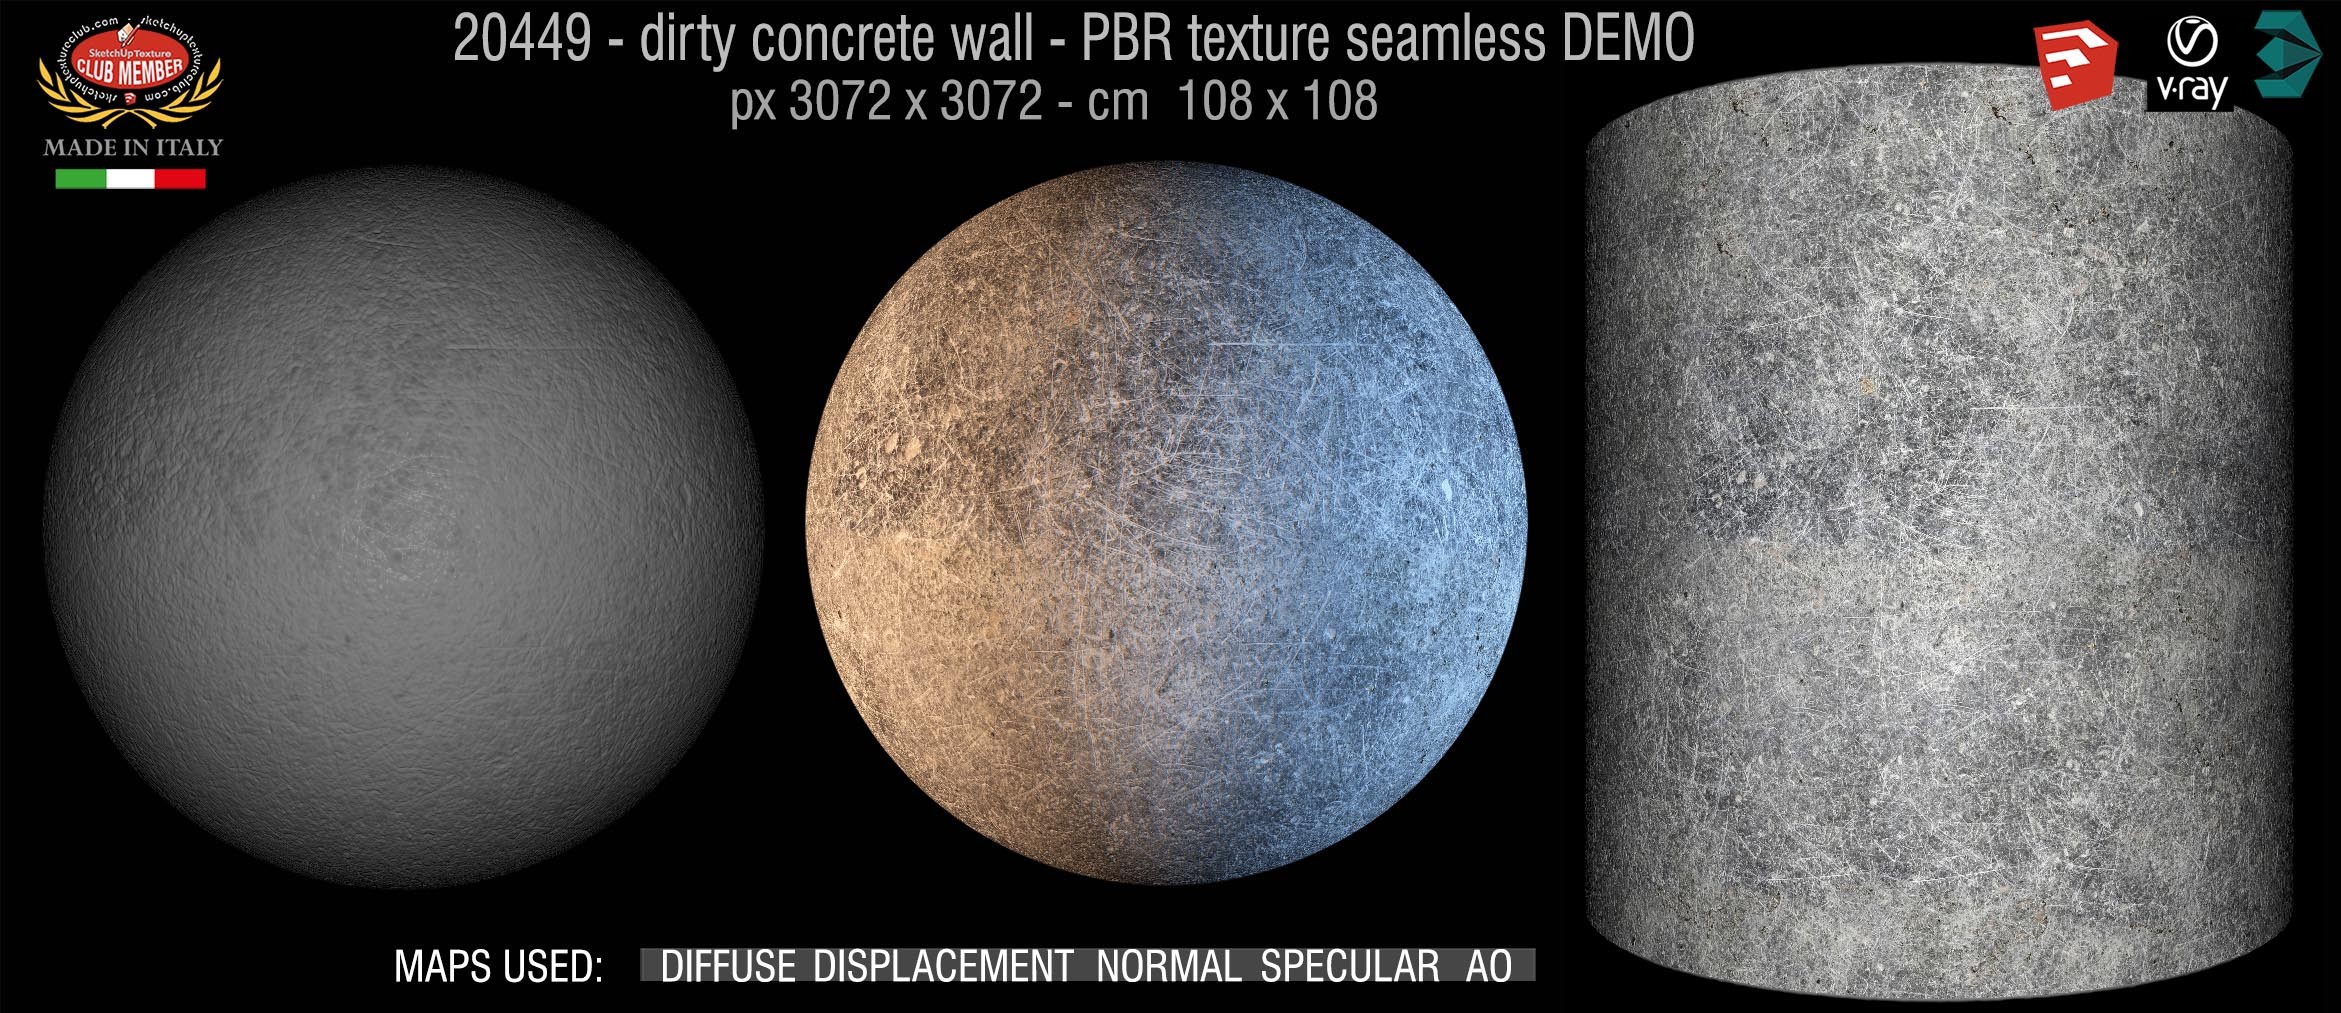 20449 dirty concrete wall PBR texture seamless DEMO